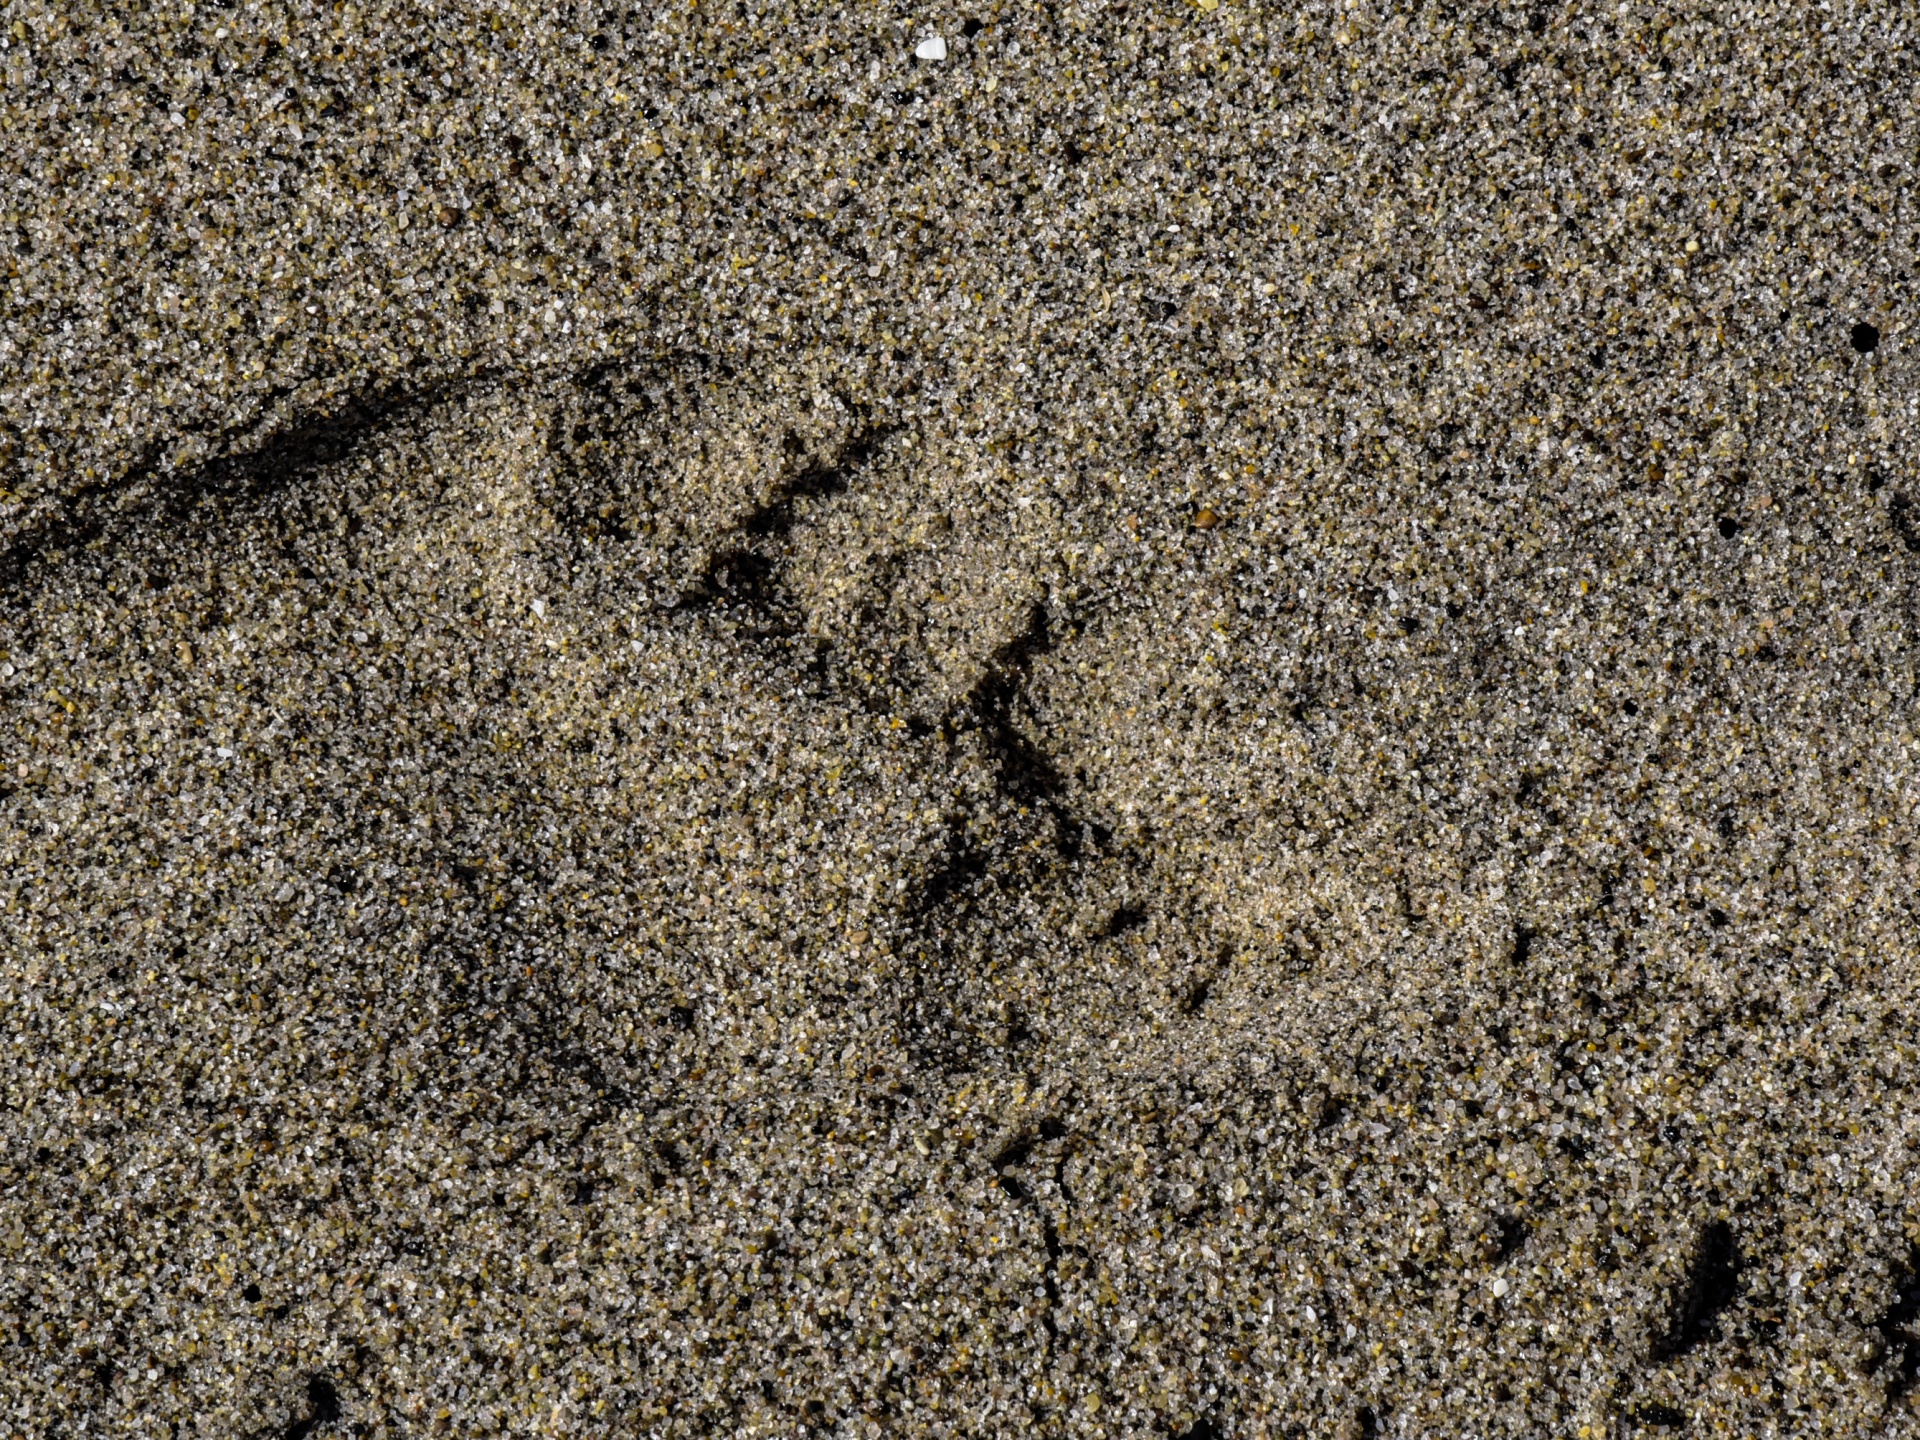 Footprint In The Sand